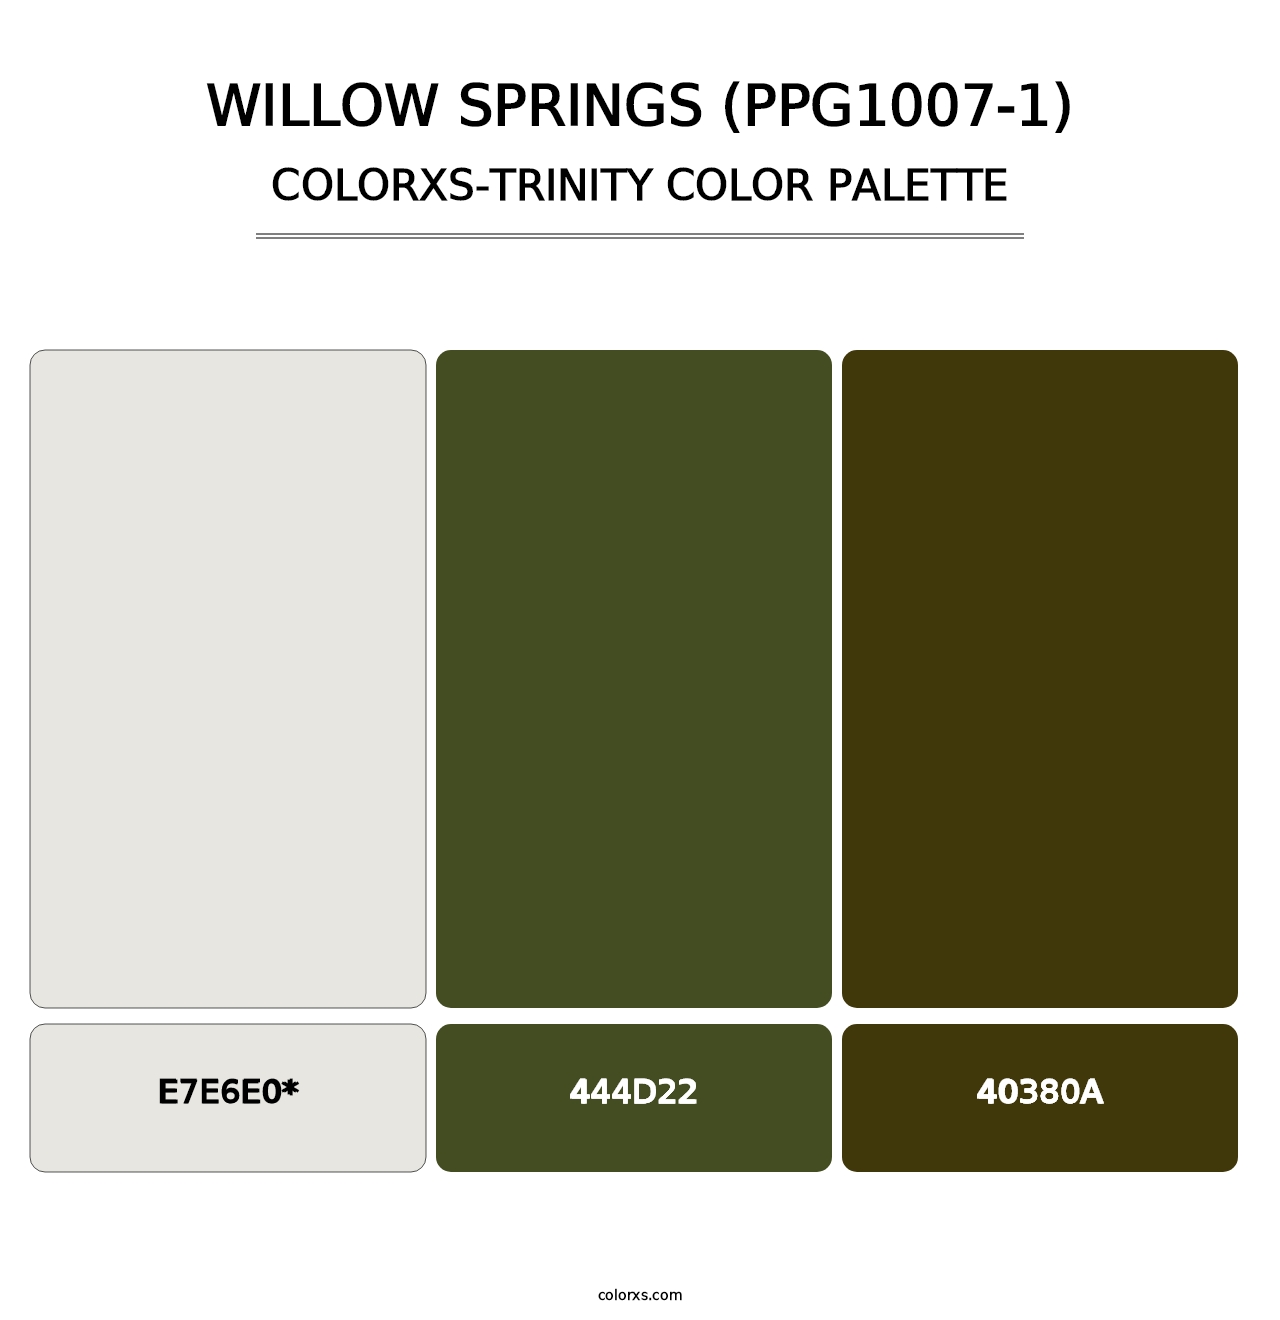 Willow Springs (PPG1007-1) - Colorxs Trinity Palette